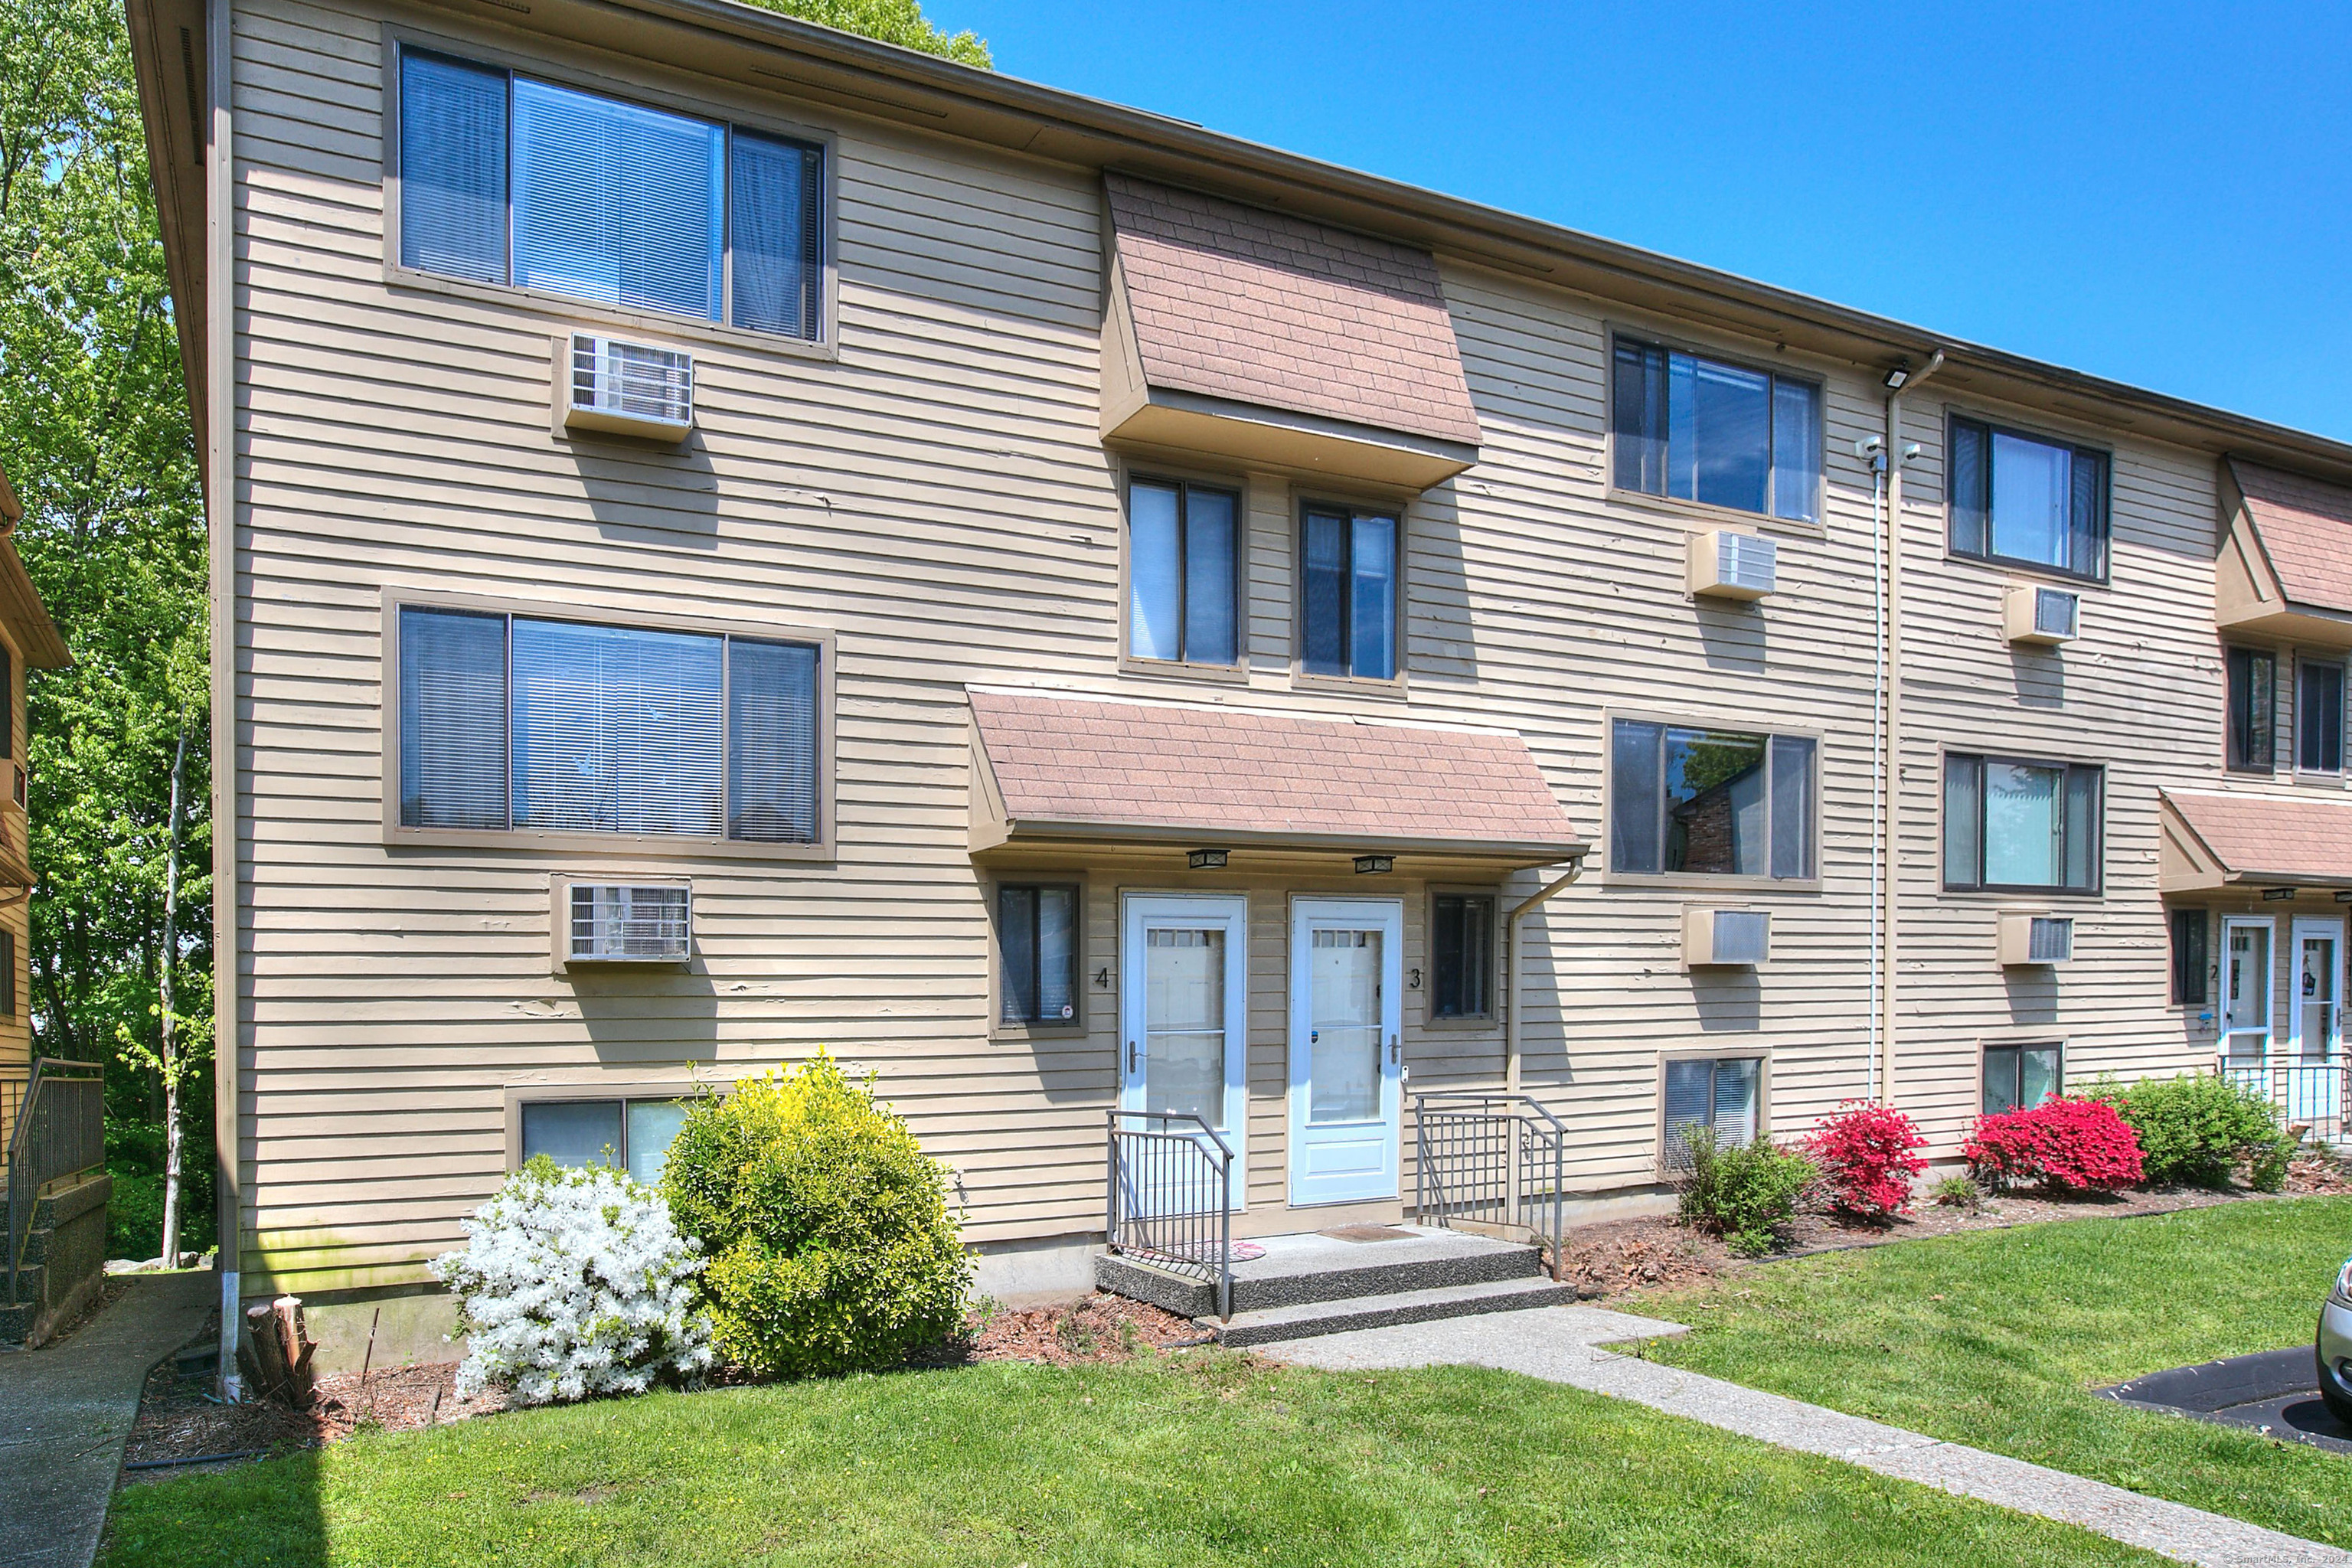 36 Highview Avenue Apt 3, Stamford, Connecticut - 3 Bedrooms  
2 Bathrooms  
8 Rooms - 